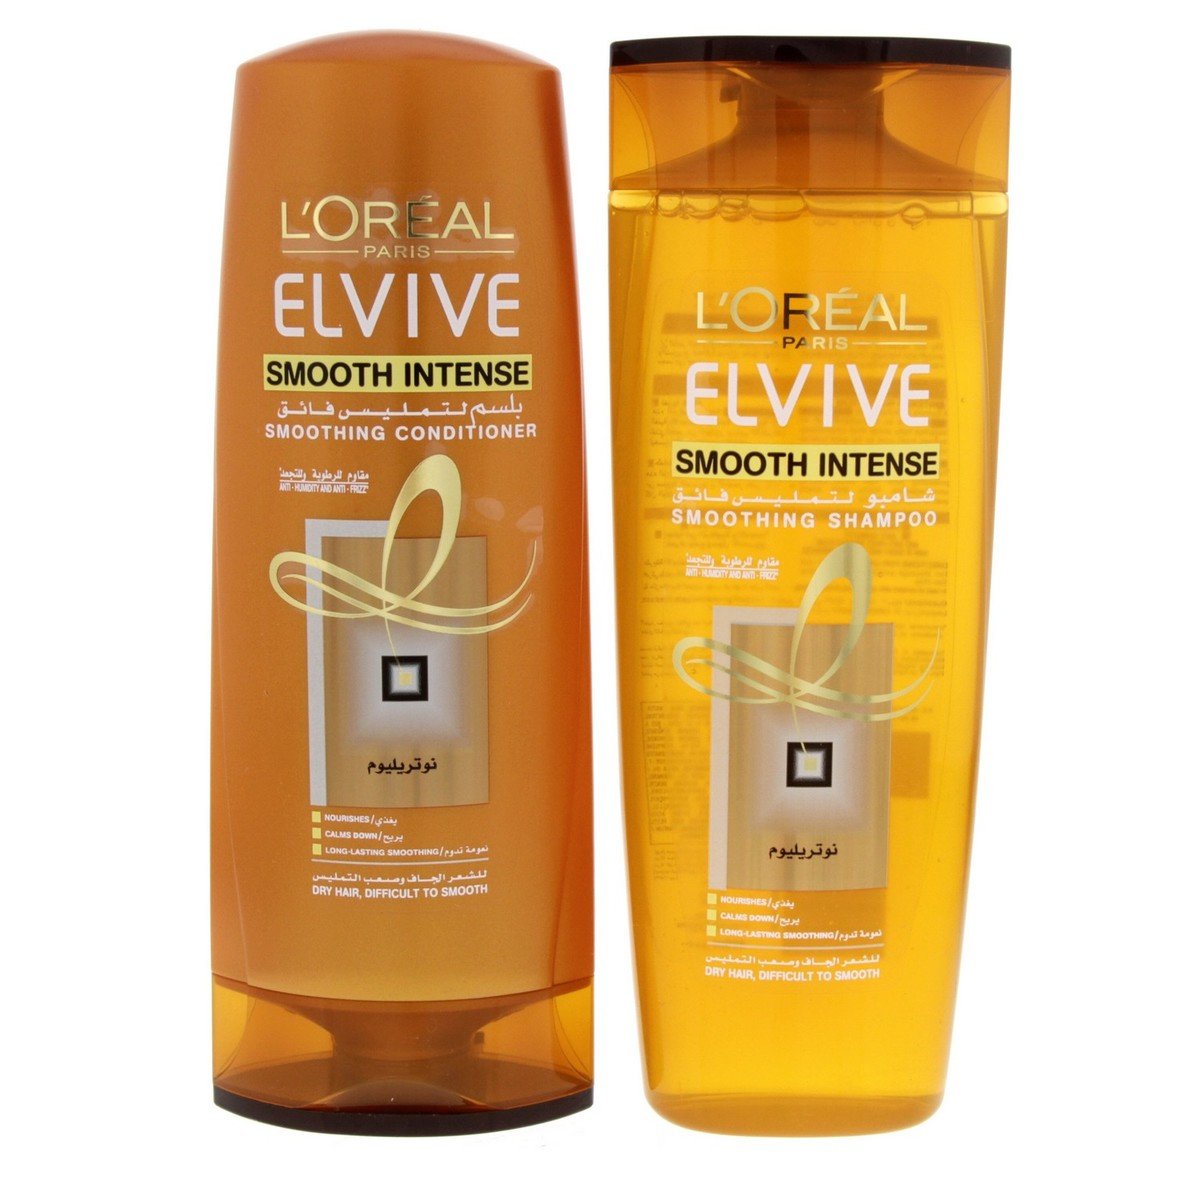 L'Oreal Elvive Smooth Intense Smoothing Shampoo 400 ml + Conditioner 400 ml